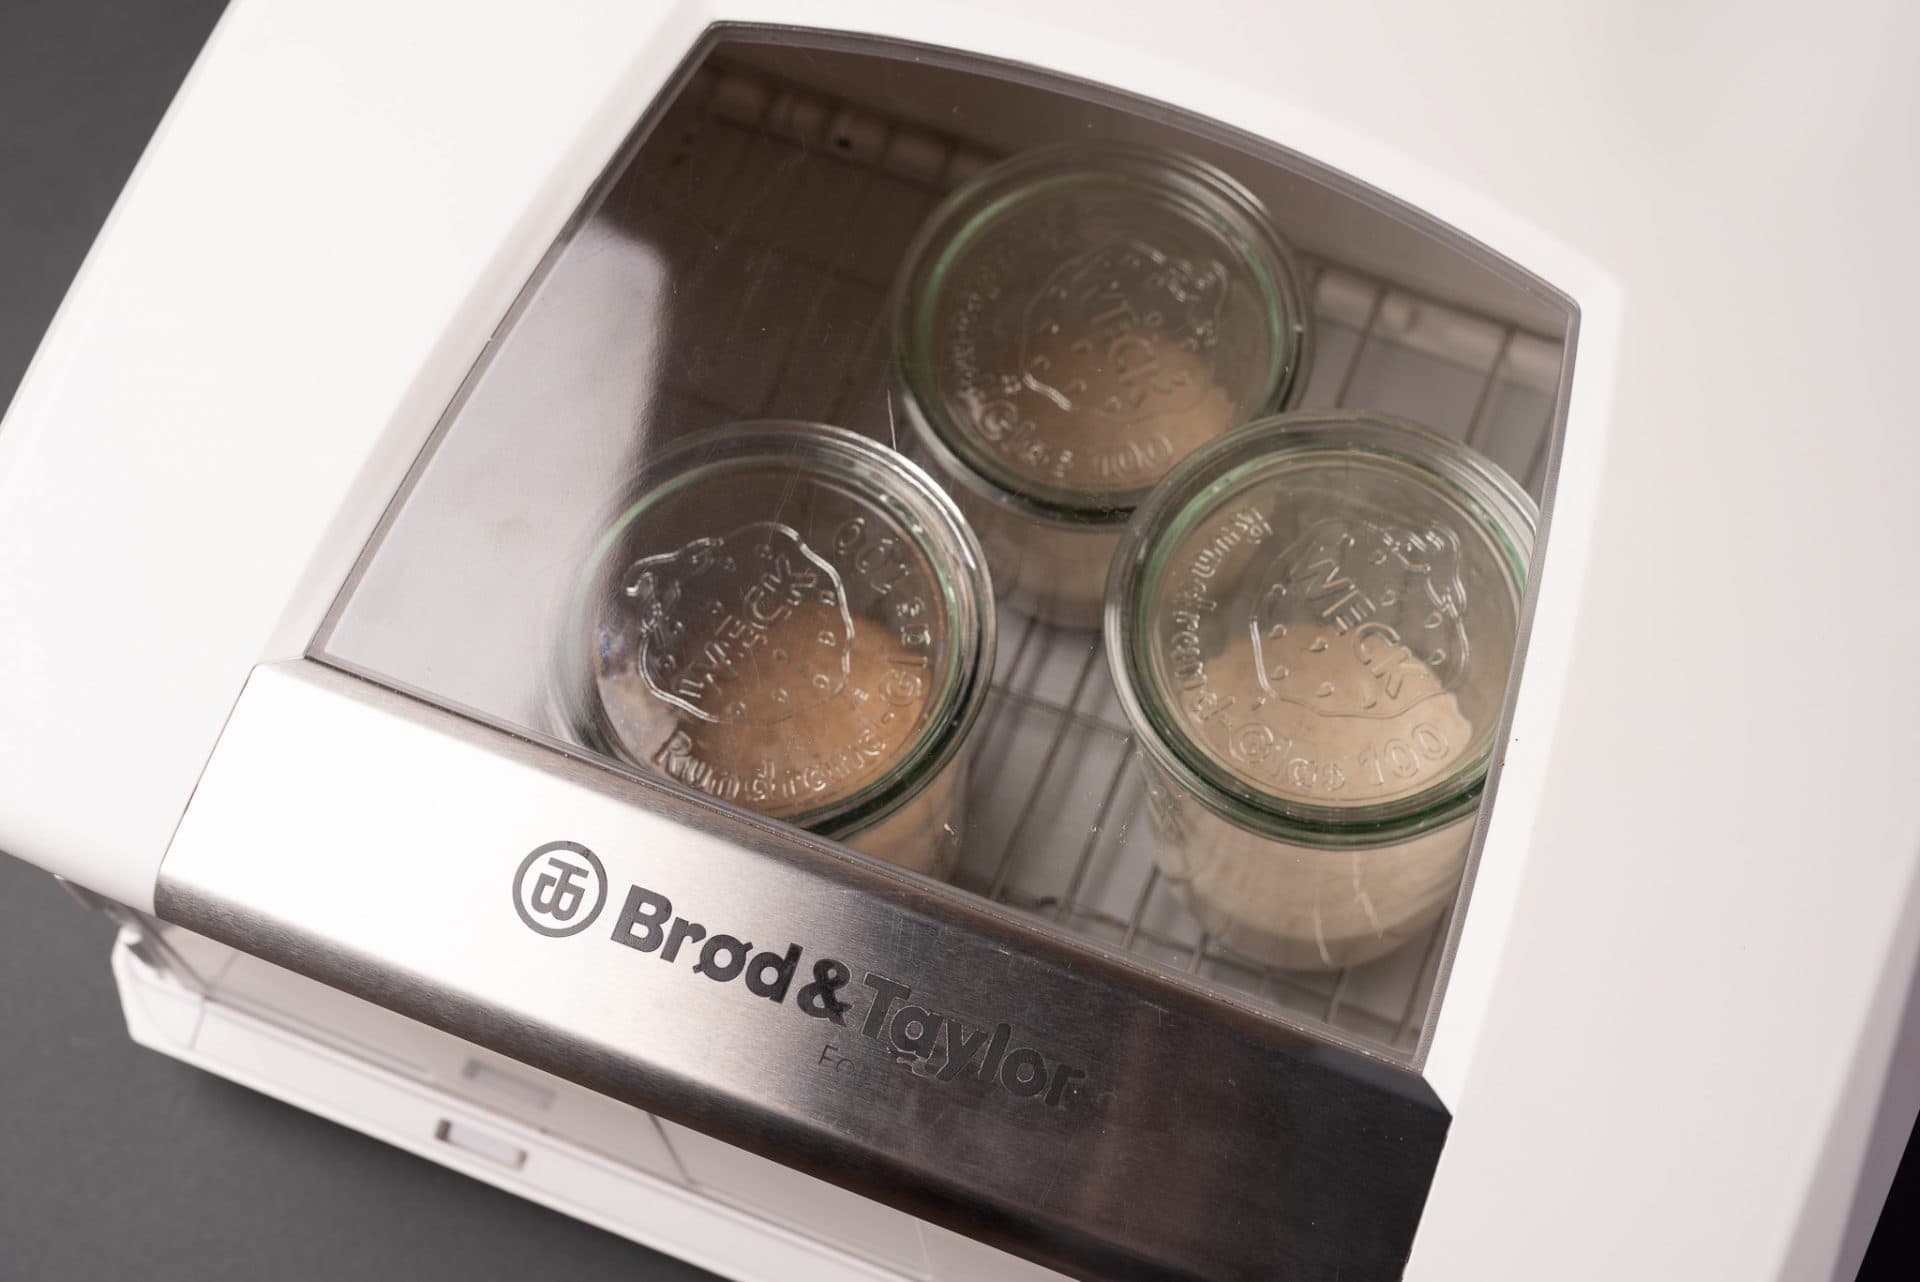 How to Use the Brod and Taylor Dough Proofer to Make Sourdough Bread